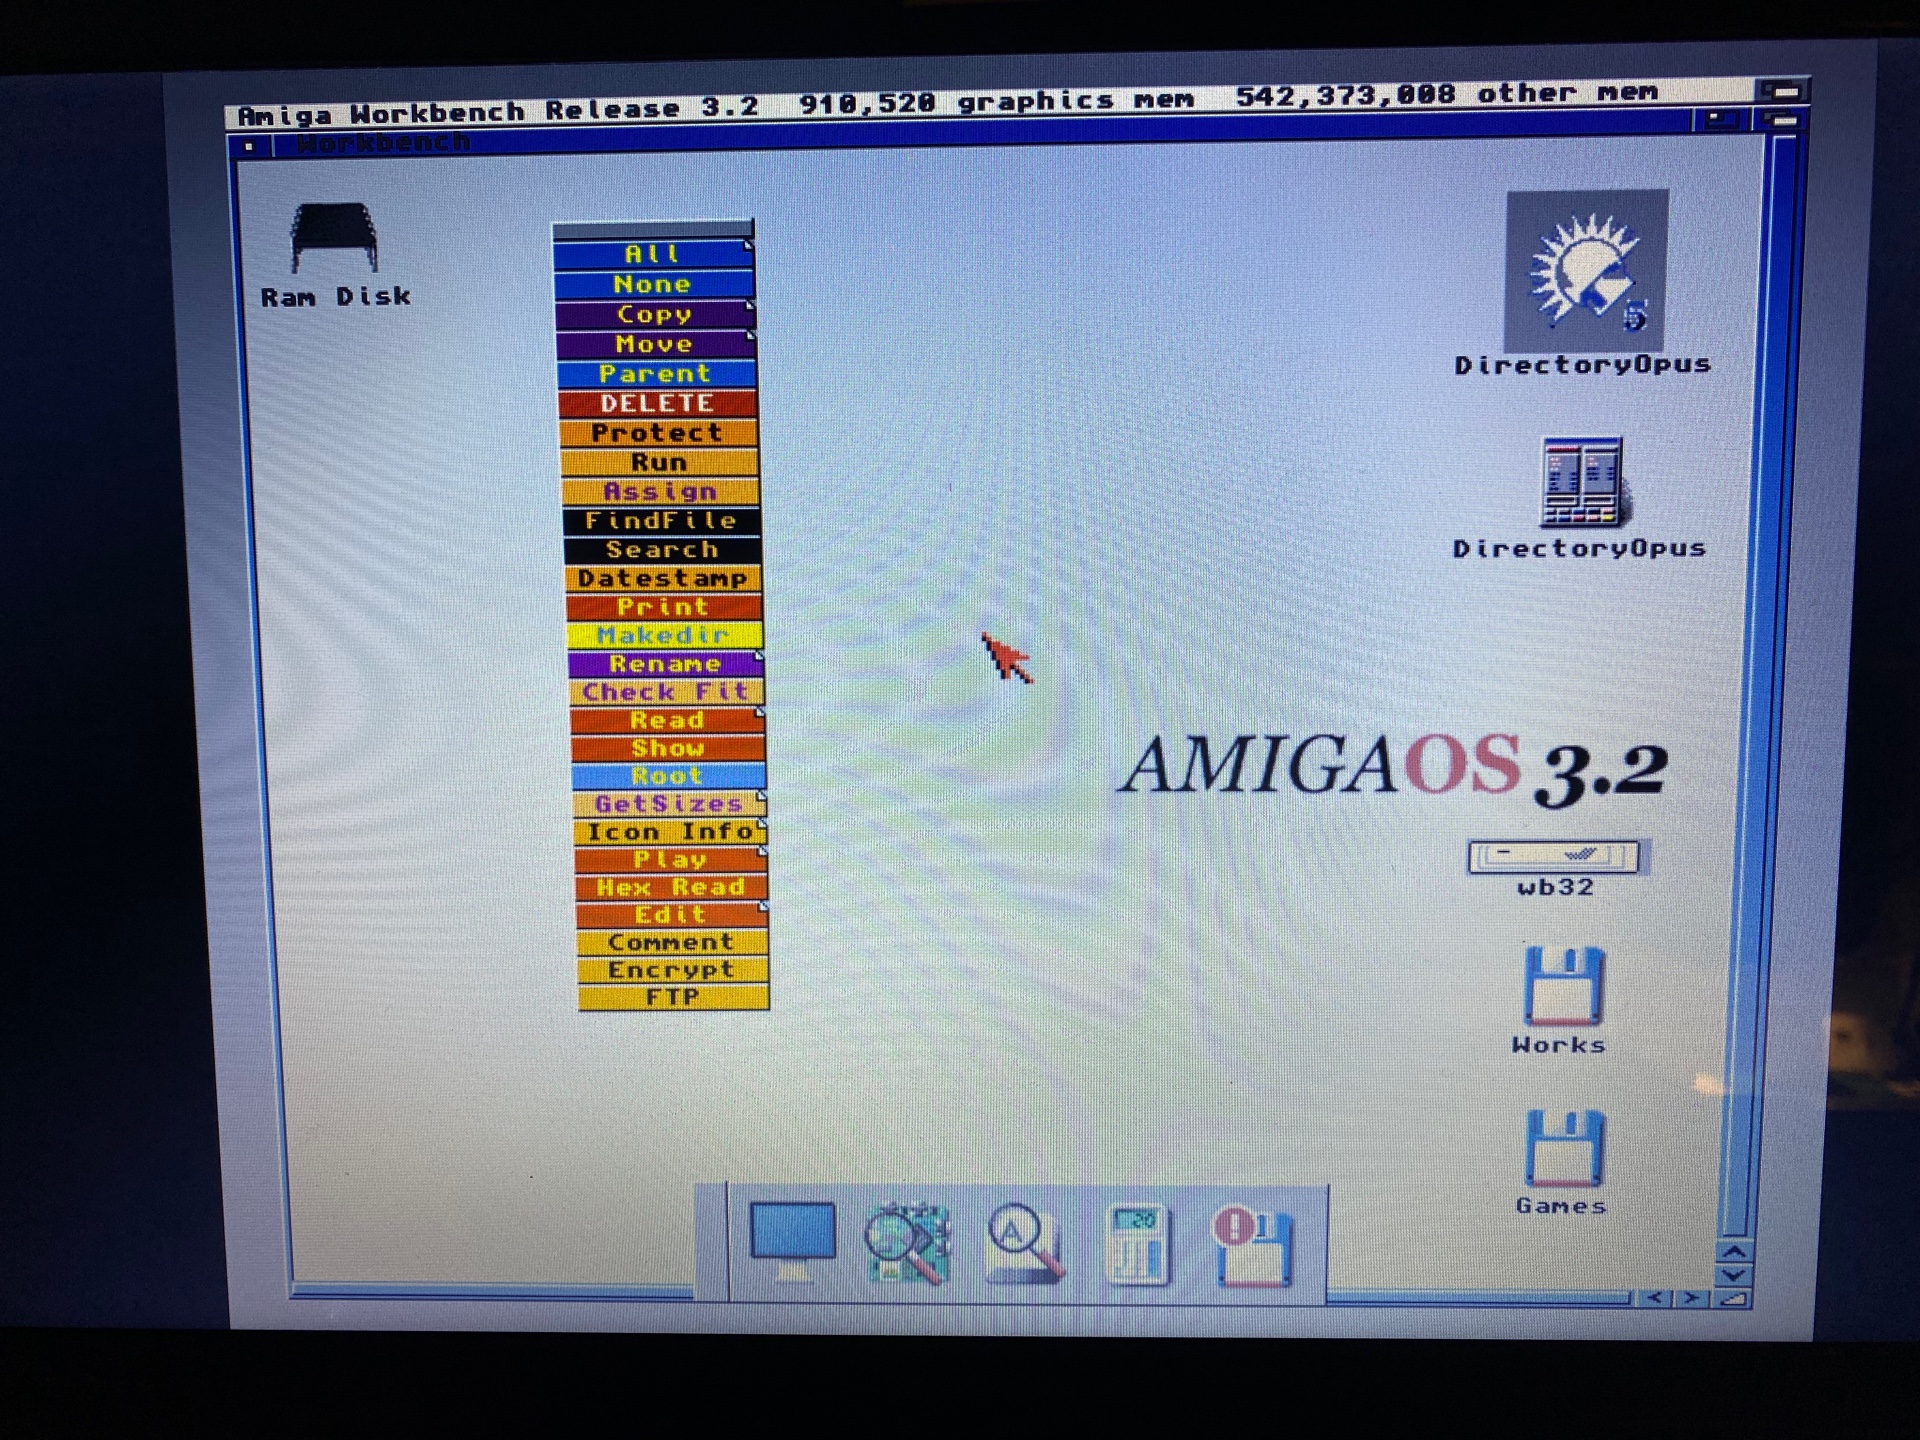 AmigaOS 3.2 64 gb Preloaded SD Card-USB Stick for Modern PC Computers